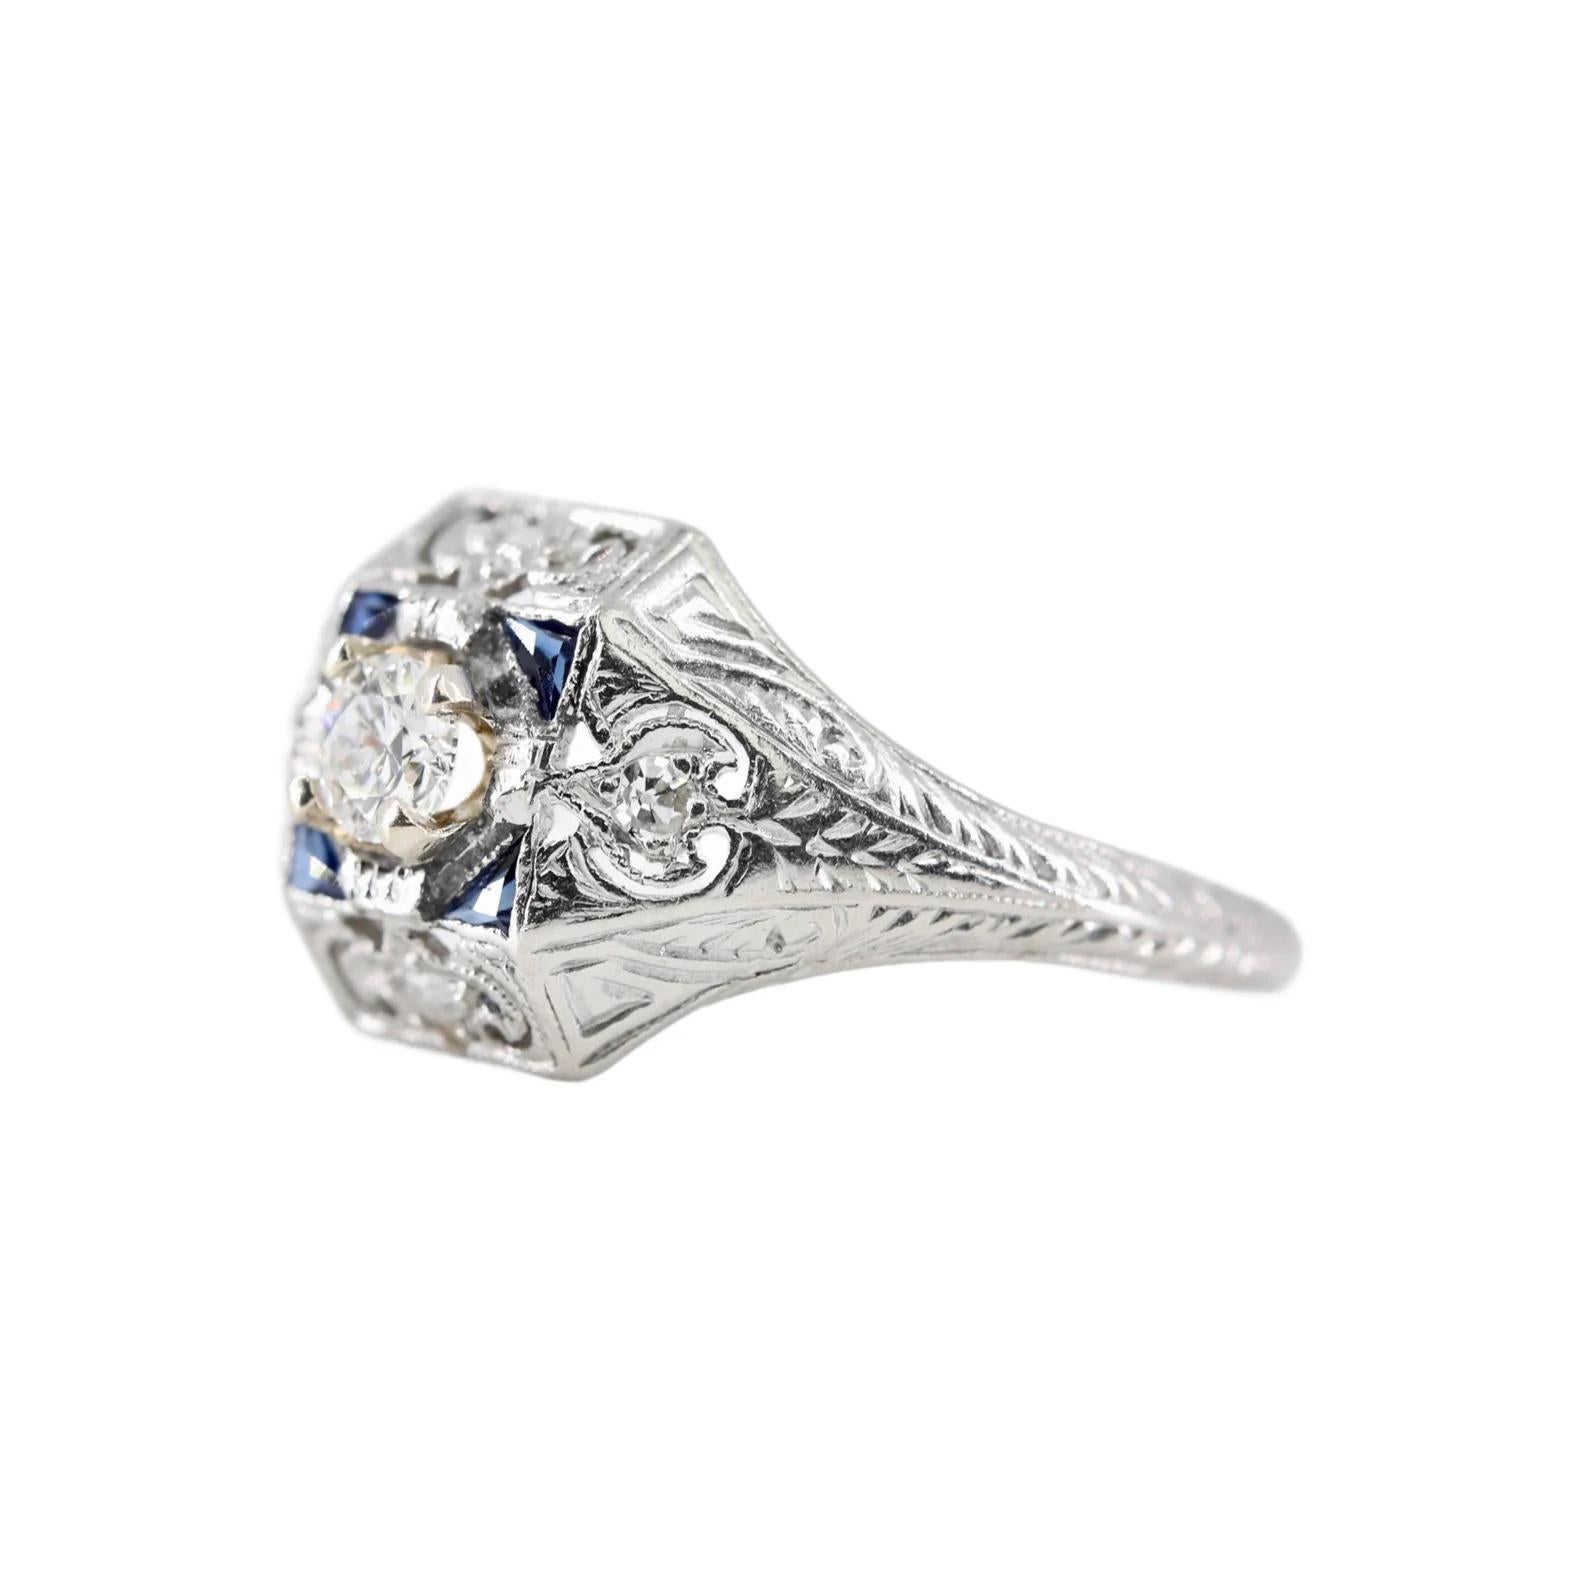 An art deco period diamond, and sapphire engagement ring in platinum. Centered by a 0.25 carat round cut diamond of H color, VS clarity. Accenting this ring are four additional diamonds of 0.04ctw, and four French cut sapphires. Completed by hand